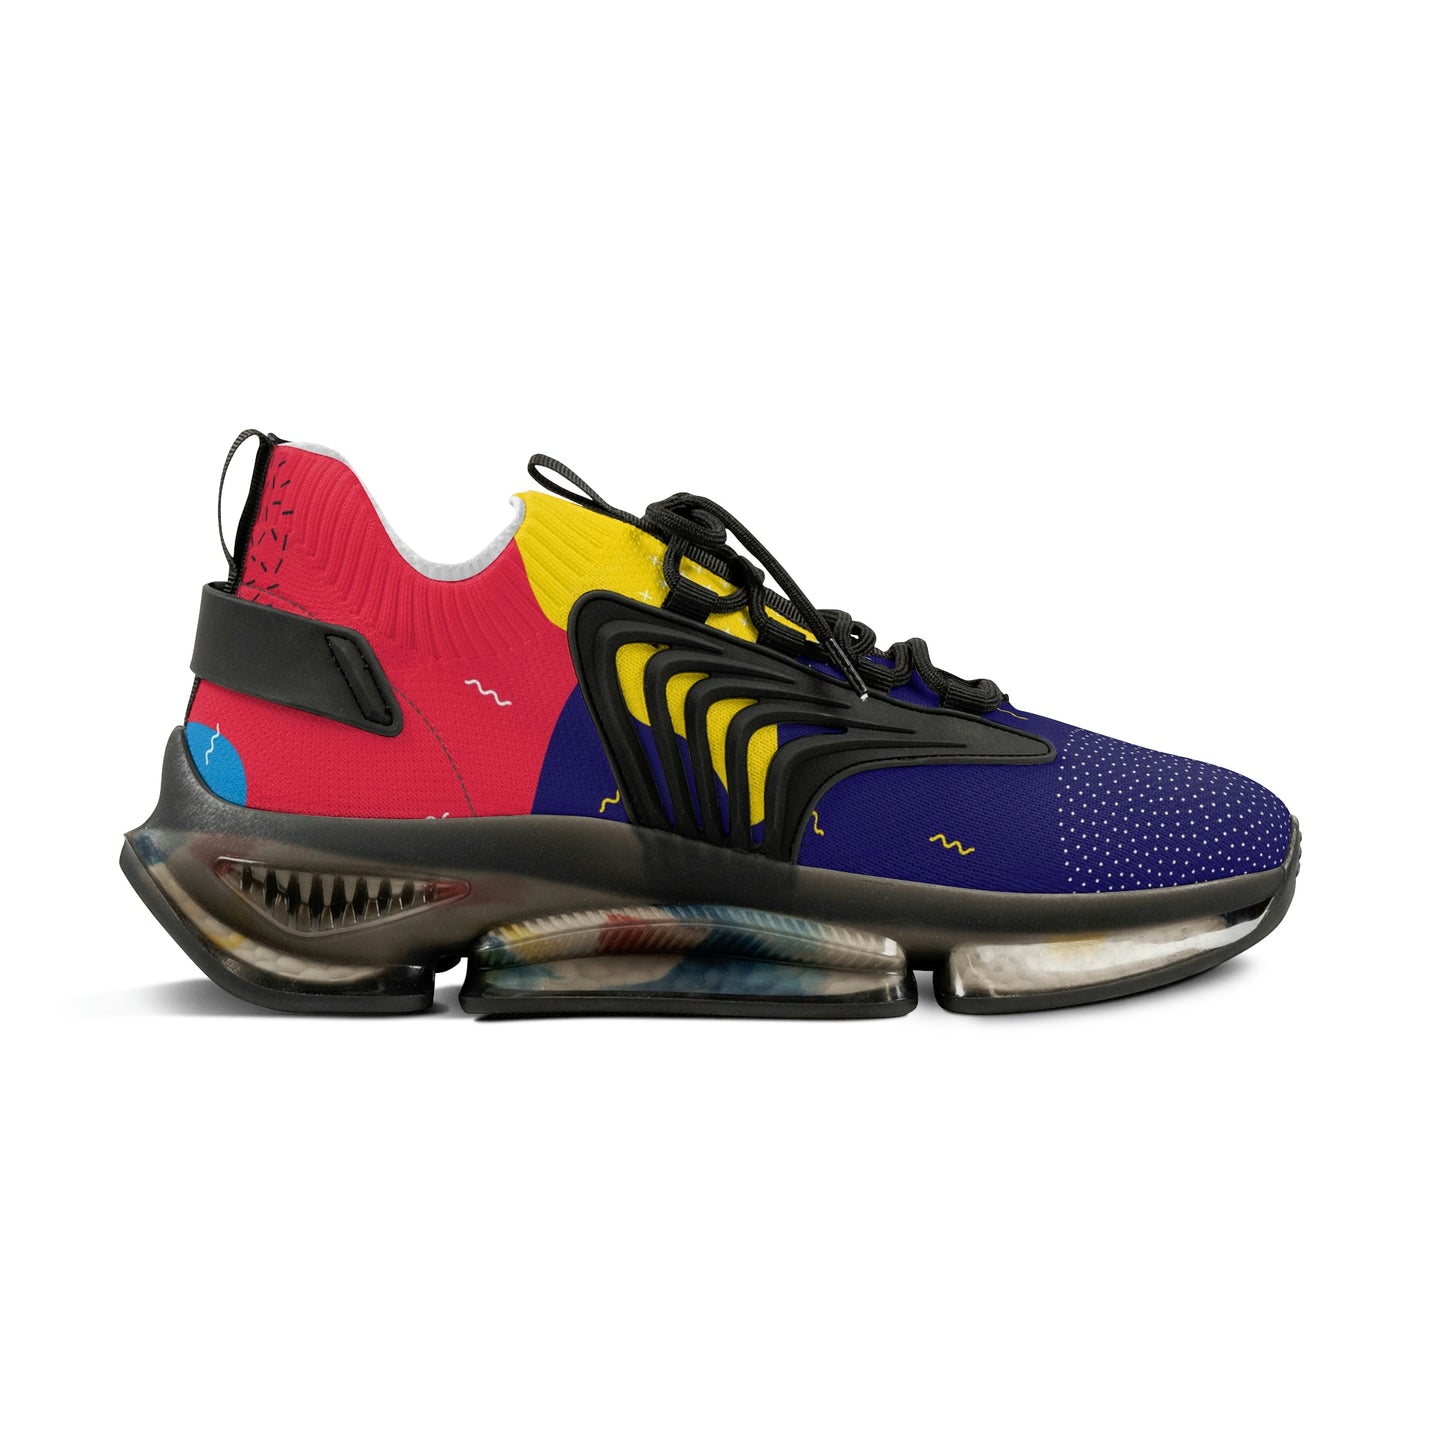 Red / Yellow / Navy Blue - Men's Mesh Sports Sneakers